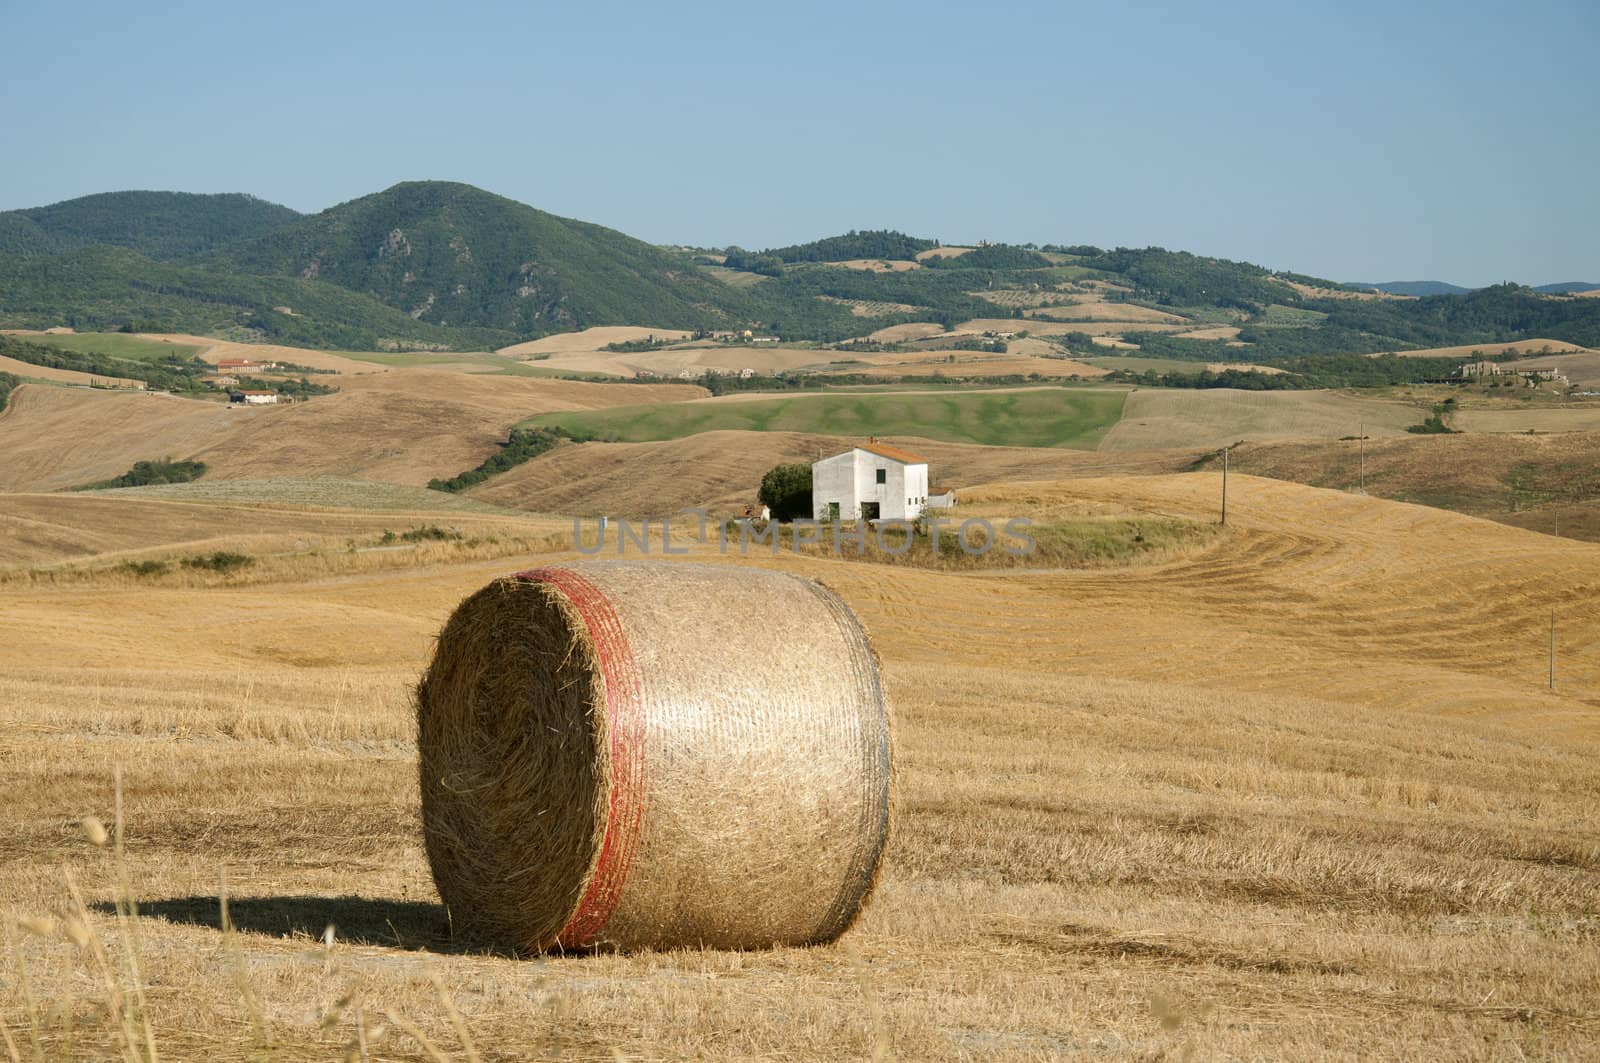 A large freshly baled round hay bale in a farm field in the Tuscan countryside